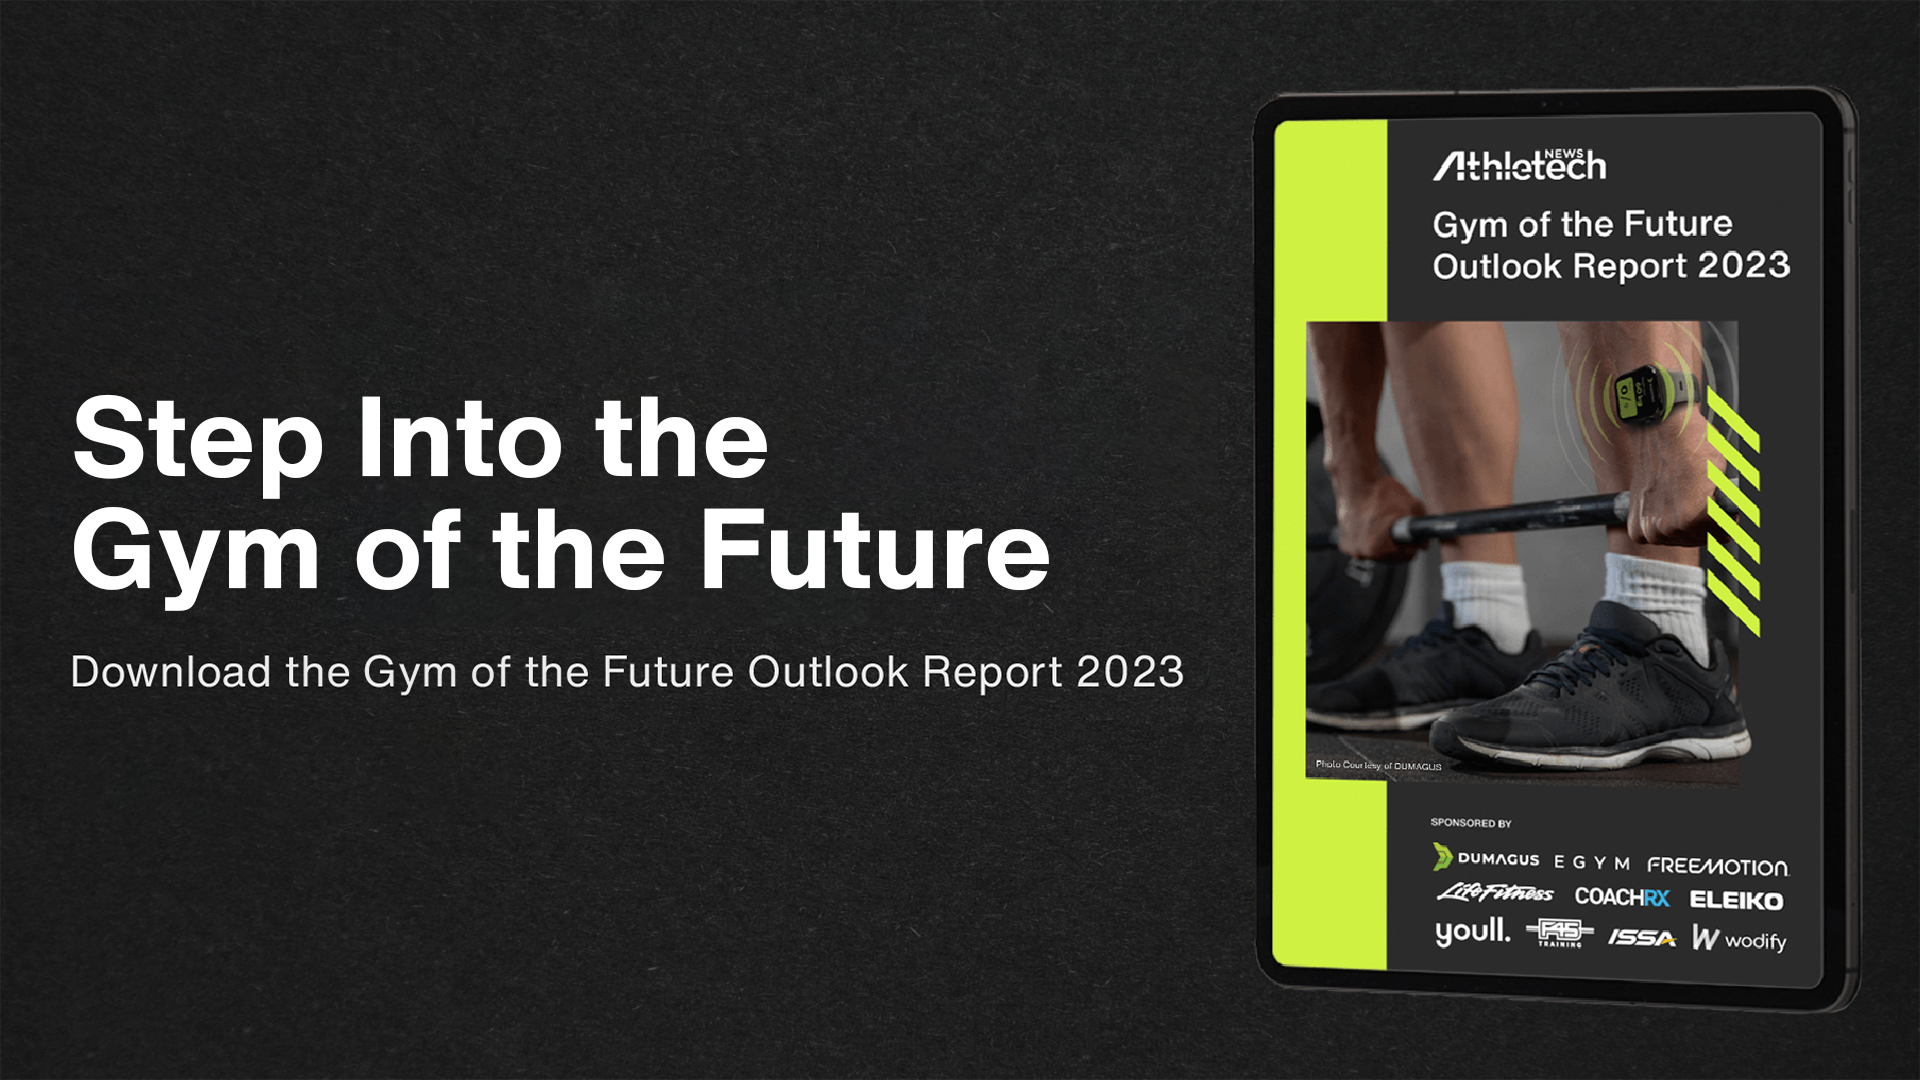 Athletech Gym of the Future Report 2023